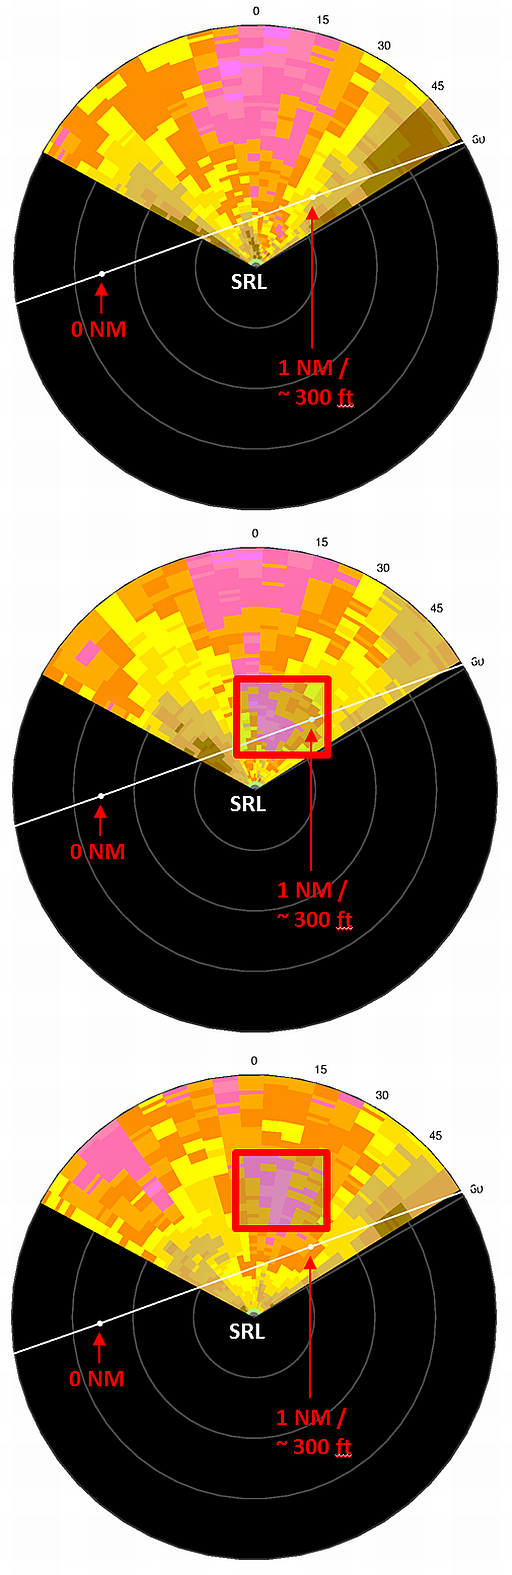 Fast-evolving flow features as revealed in a sequence of SRL scans.  Warm colours represent velocities away from the SRL (center of each snapshot).  Successive images are separated by 40-second intervals, suggesting a duration of less than 2 minutes for the event  a concurrent windshear report was received over 25RA at an altitude of 200 feet.